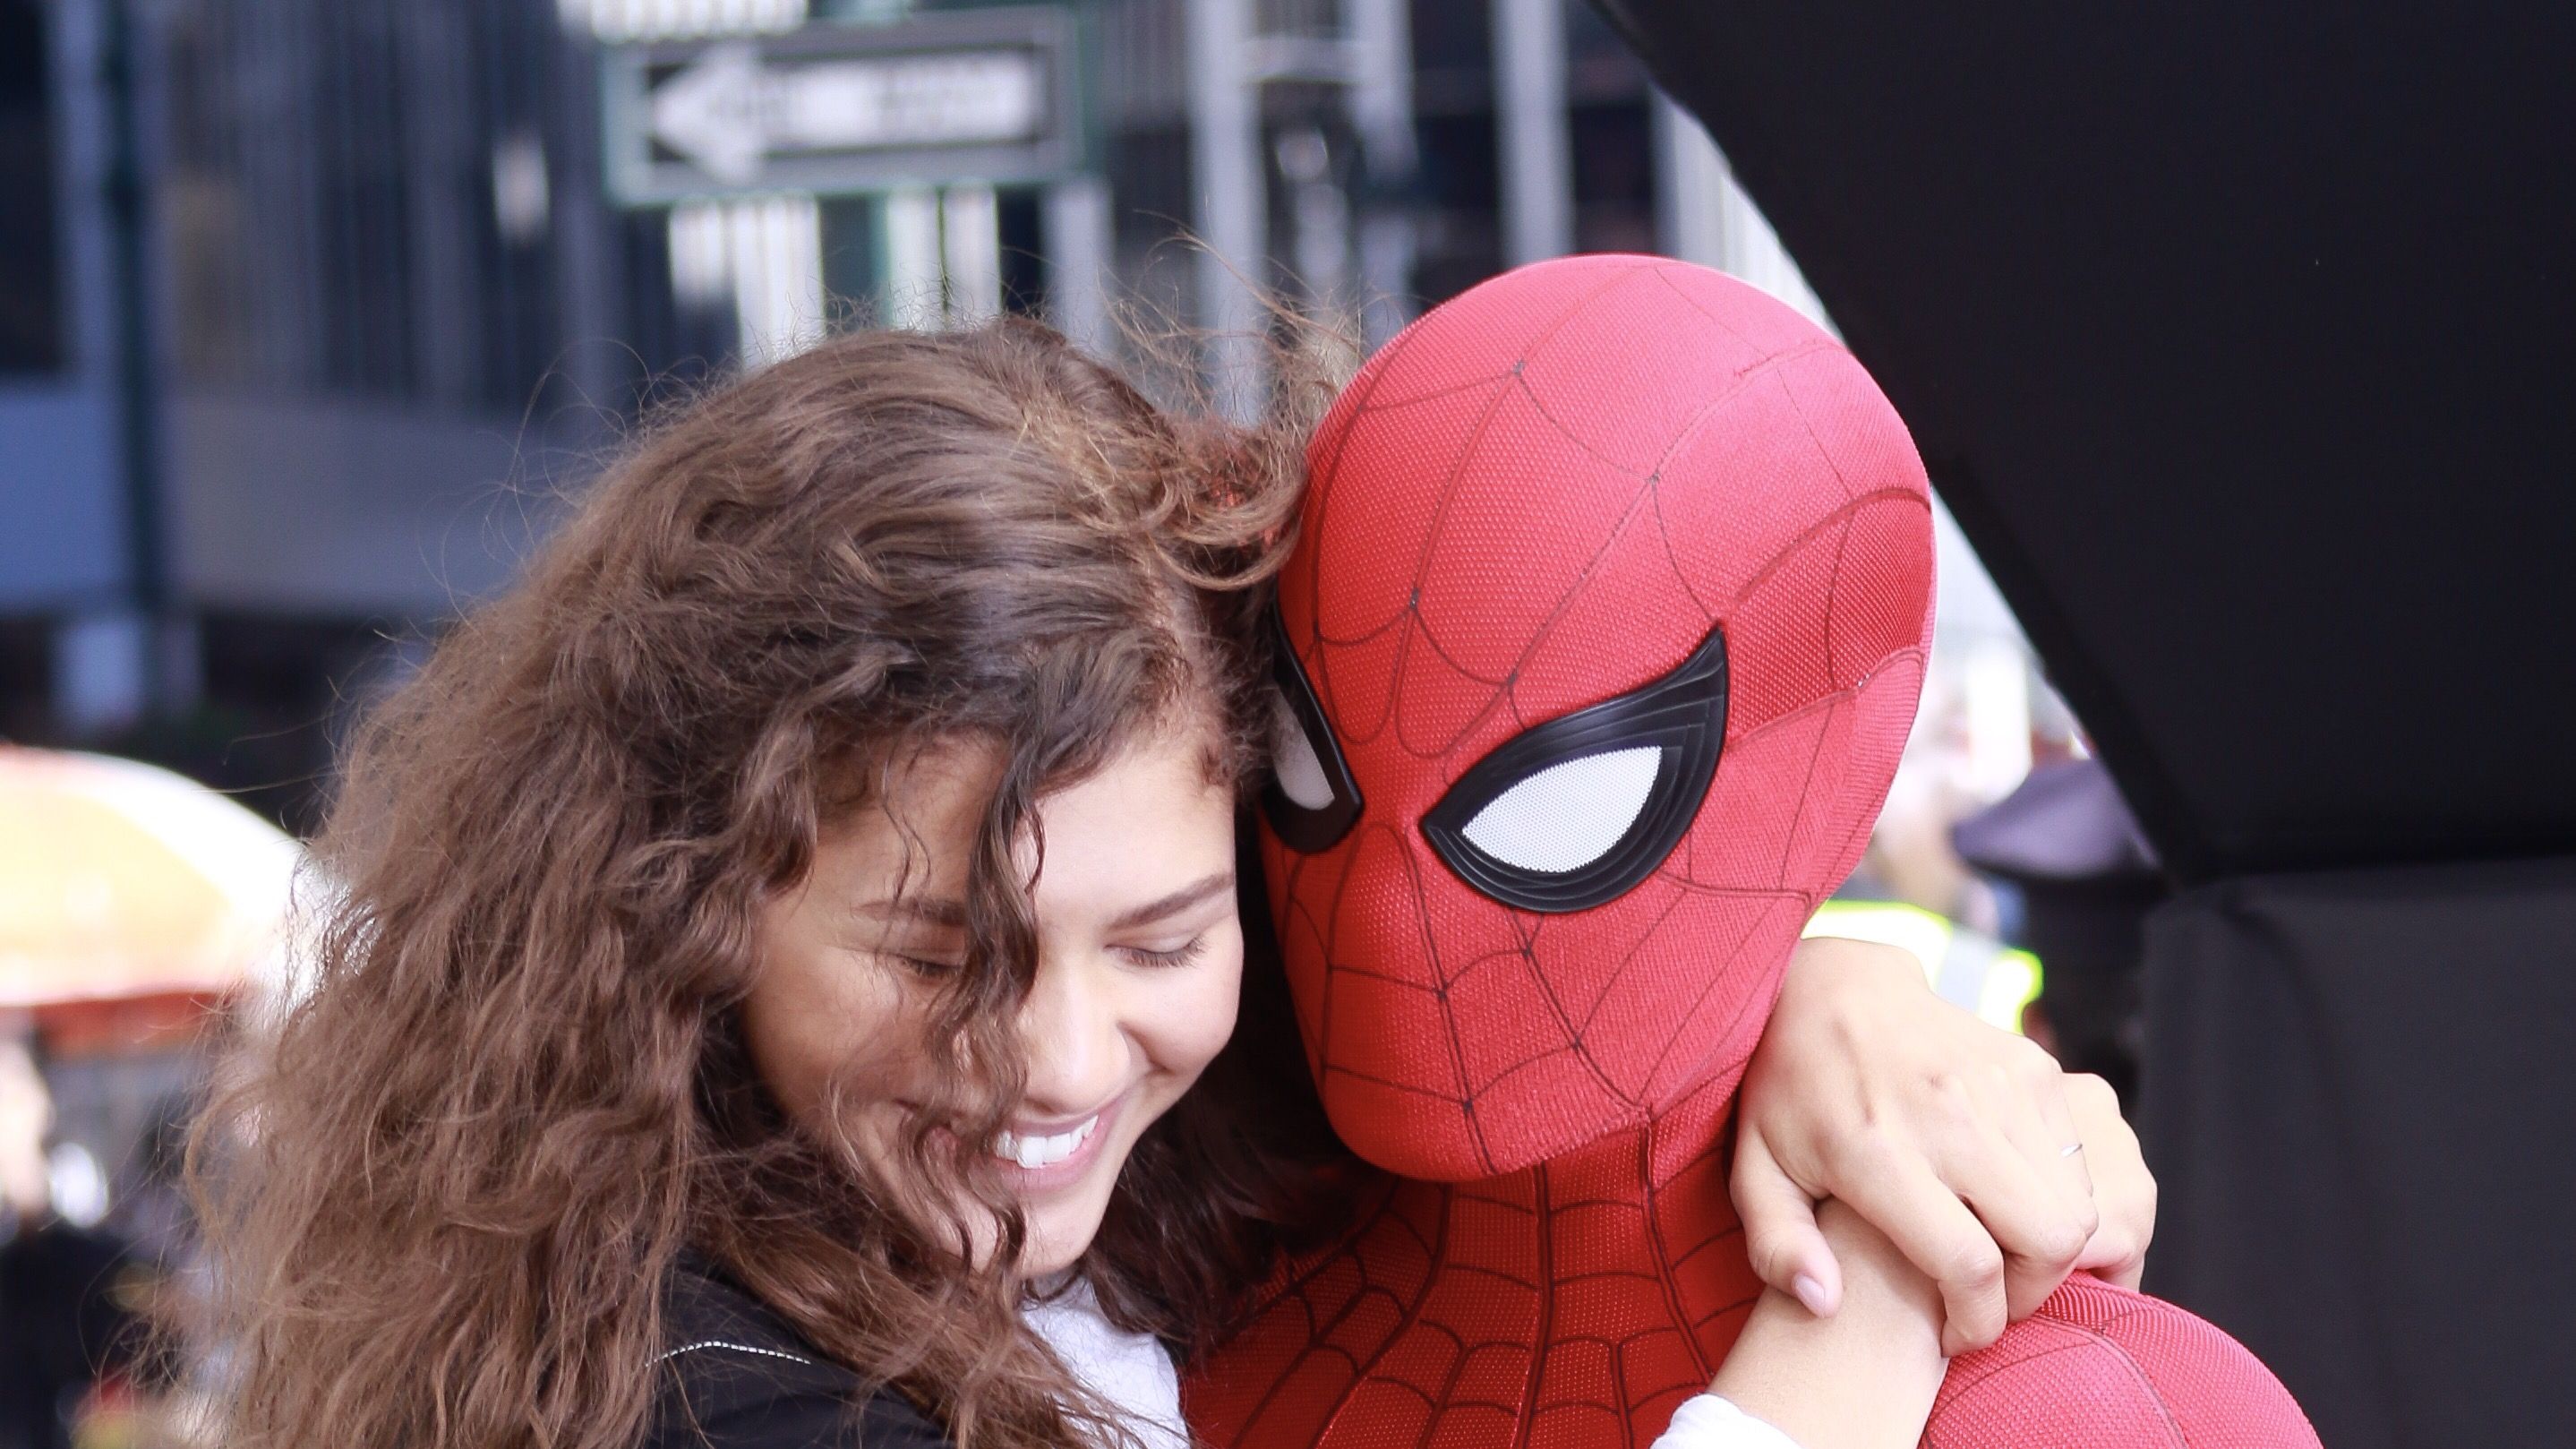 Spider-Man: No Way Home trailer may drop today – but will it be